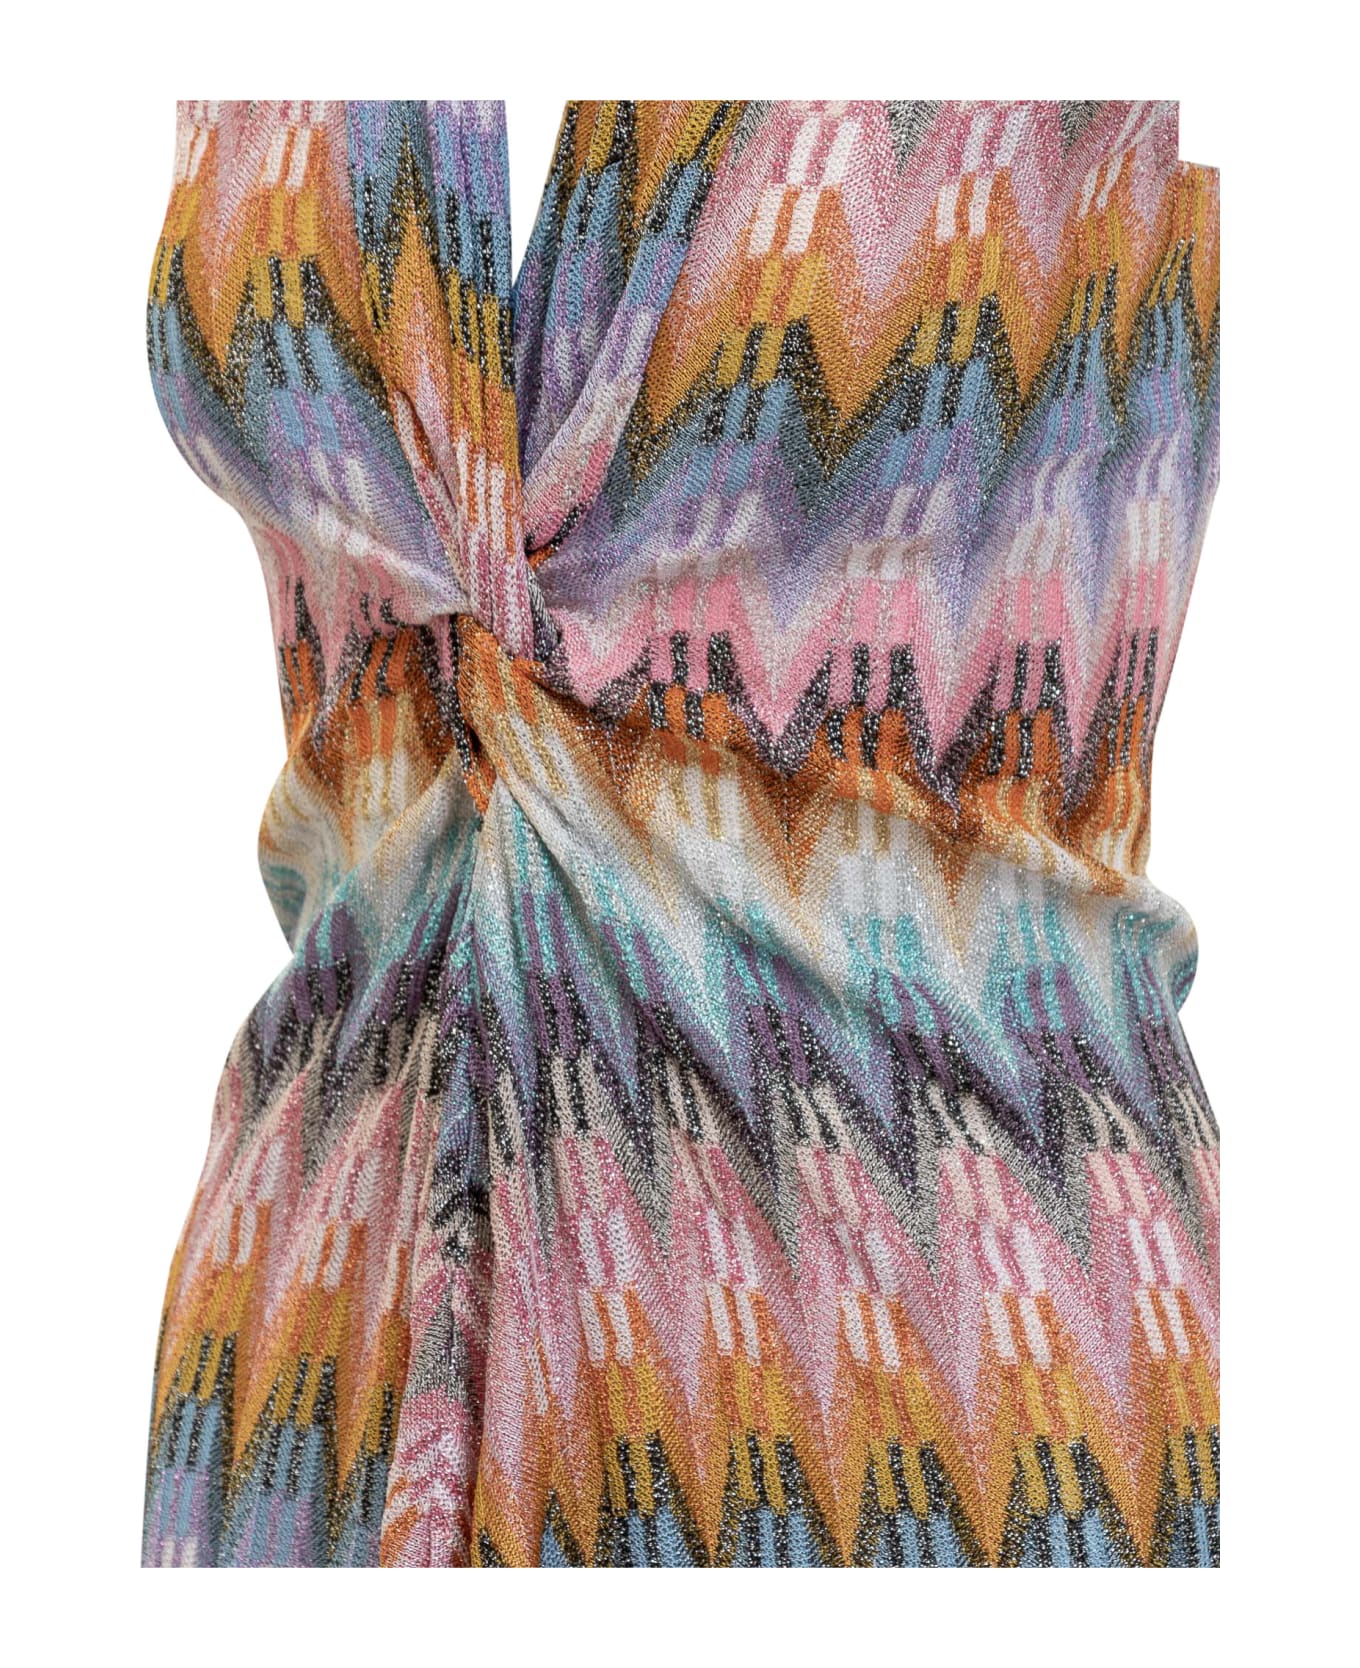 Missoni Long Dress With Metalized Filaments